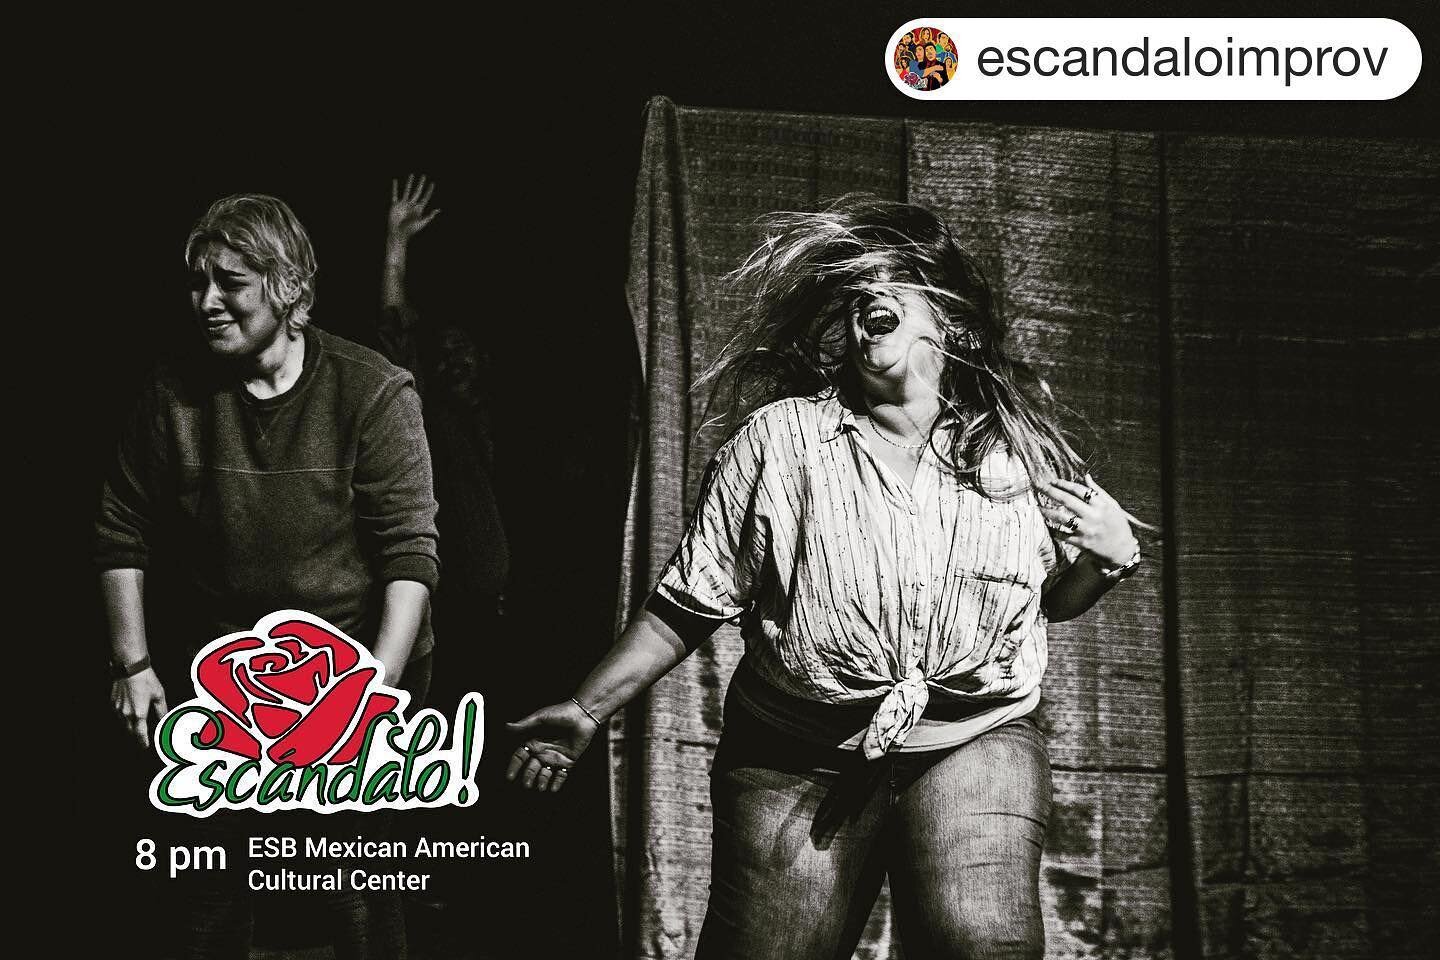 Tonight! Catch 3 Or Less&rsquo; @micco6 and @living_the_dream_catch_me in the &iexcl;Esc&agrave;ndalo! improv show!

#Repost @escandaloimprov
・・・
Sexy hair flip or rage growl?

Anything goes at the &iexcl;Esc&aacute;ndalo! show tonight w special gues